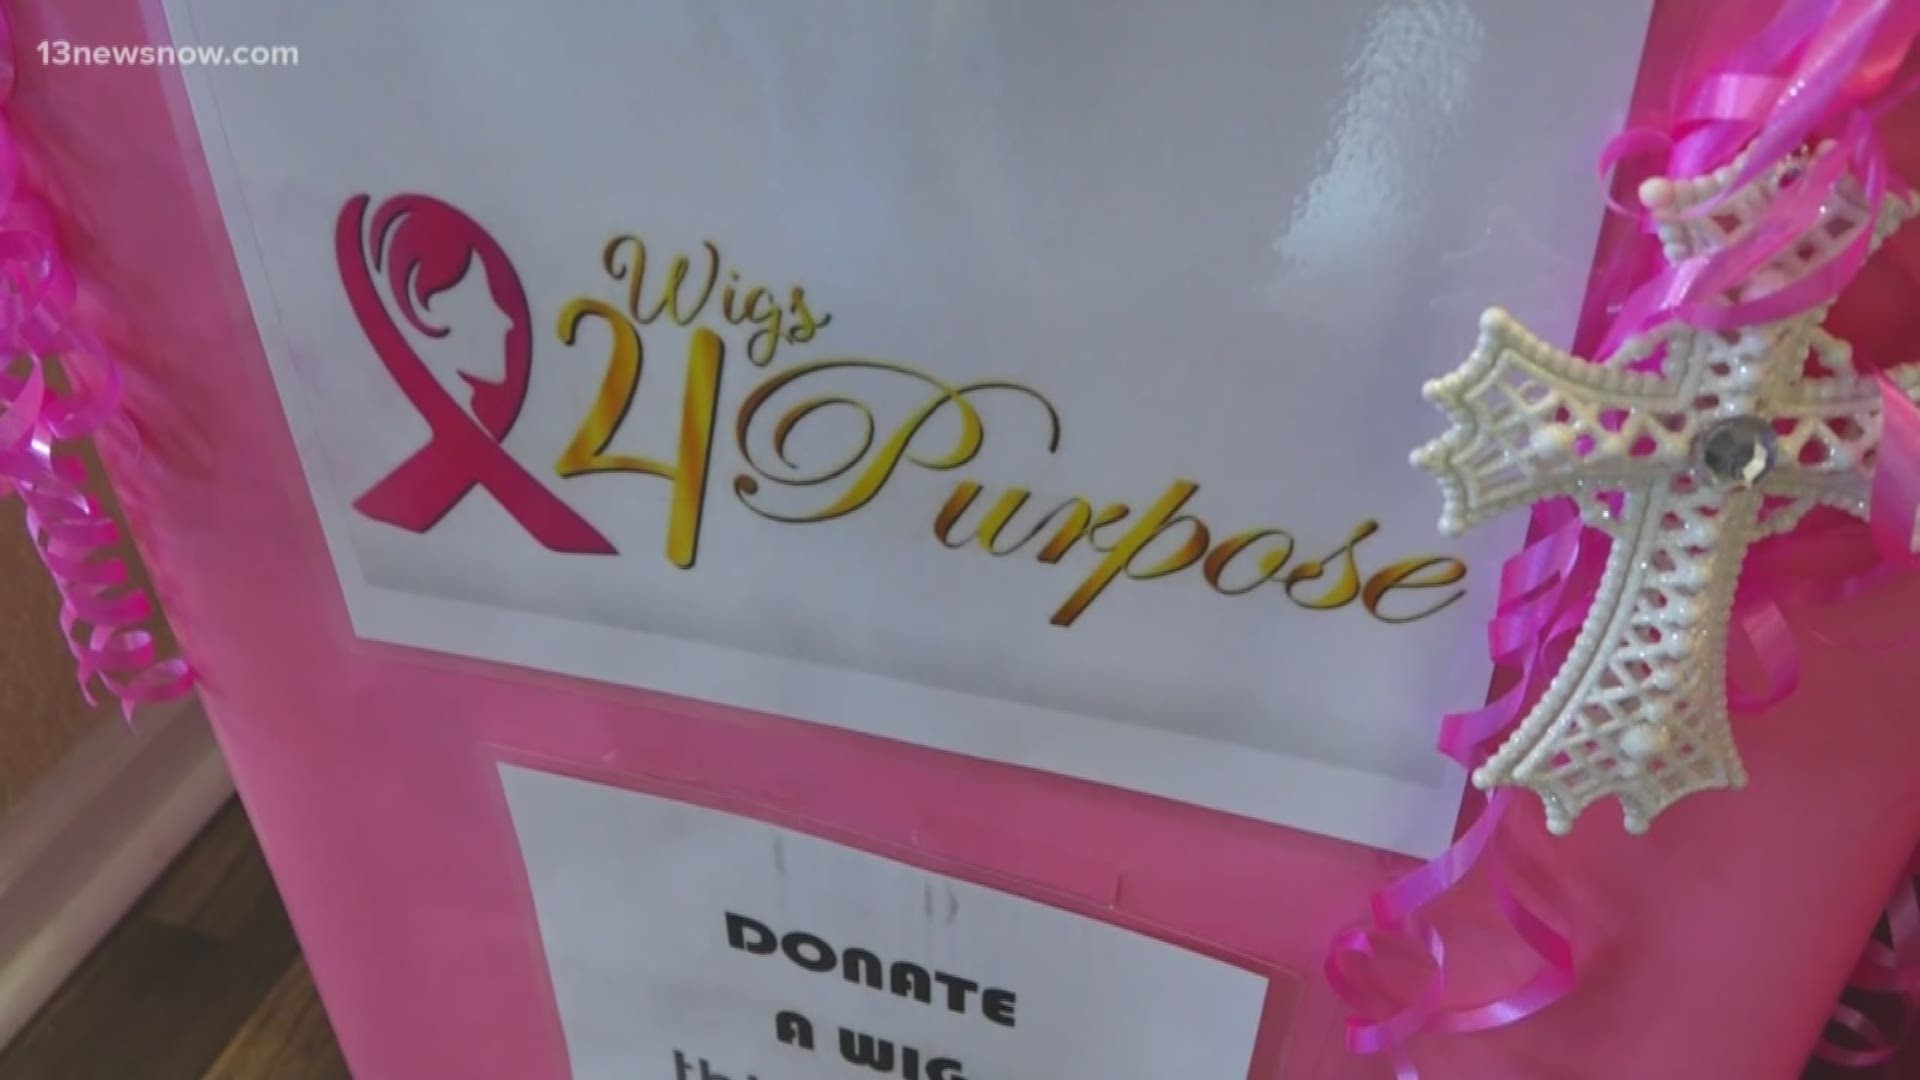 She's an artist and hair is her canvas. Wigs 4 Purpose gives hope to cancer patients, women with hair loss.